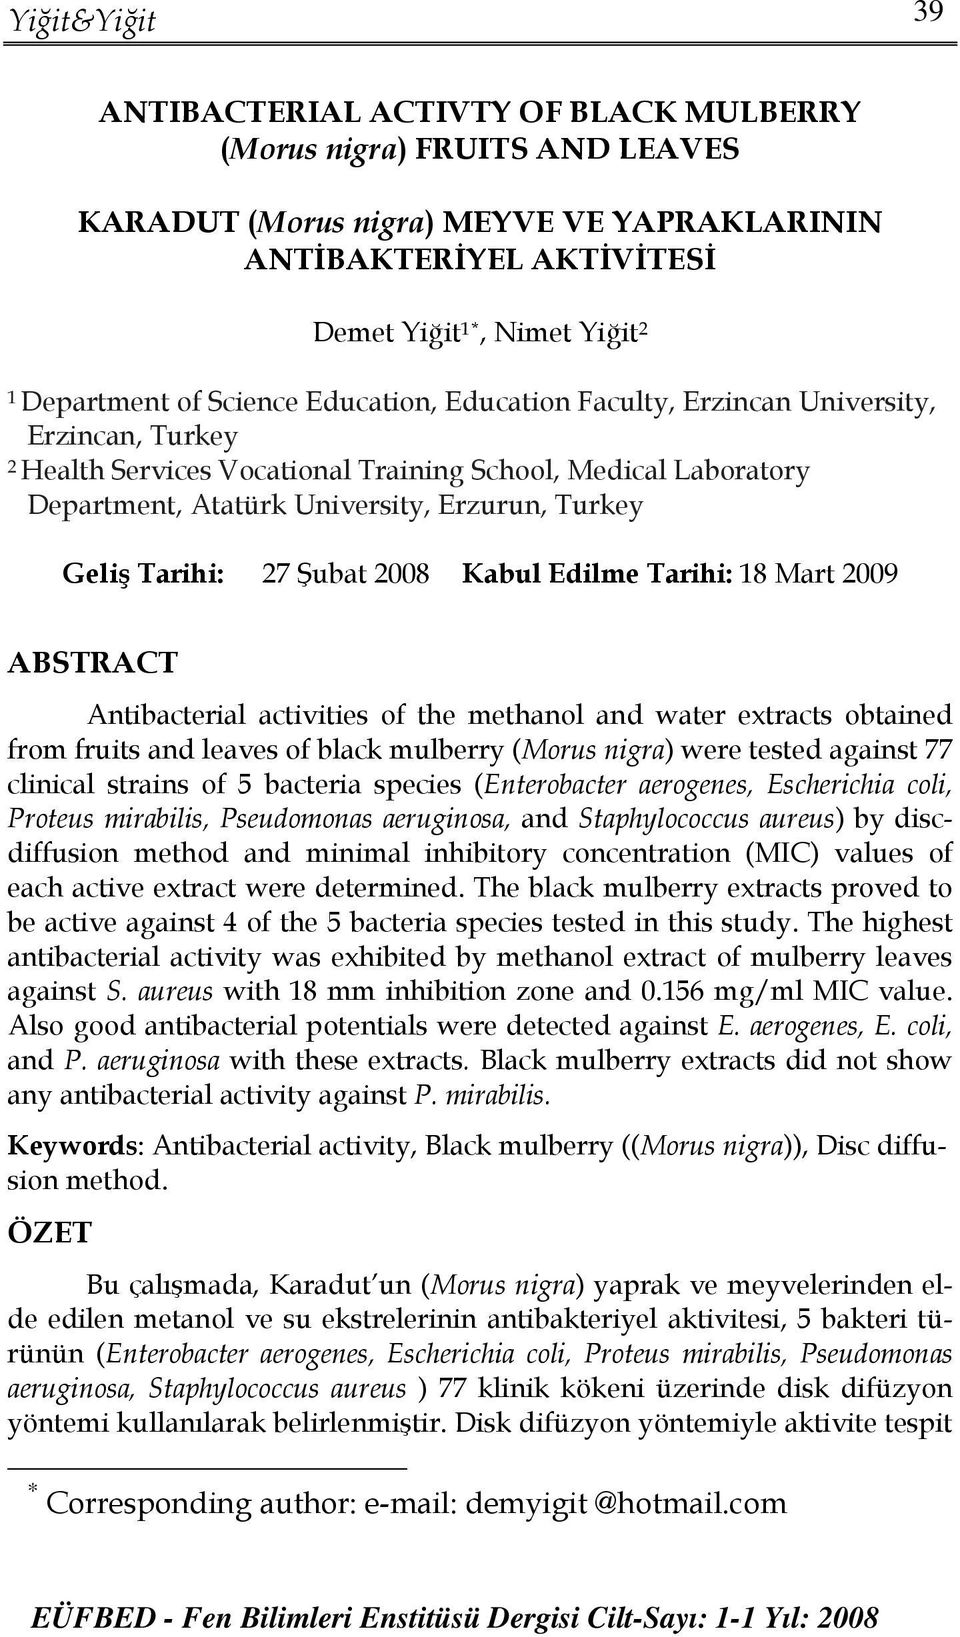 Turkey Geliş Tarihi: 27 Şubat 2008 Kabul Edilme Tarihi: 18 Mart 2009 ABSTRACT Antibacterial activities of the methanol and water extracts obtained from fruits and leaves of black mulberry (Morus